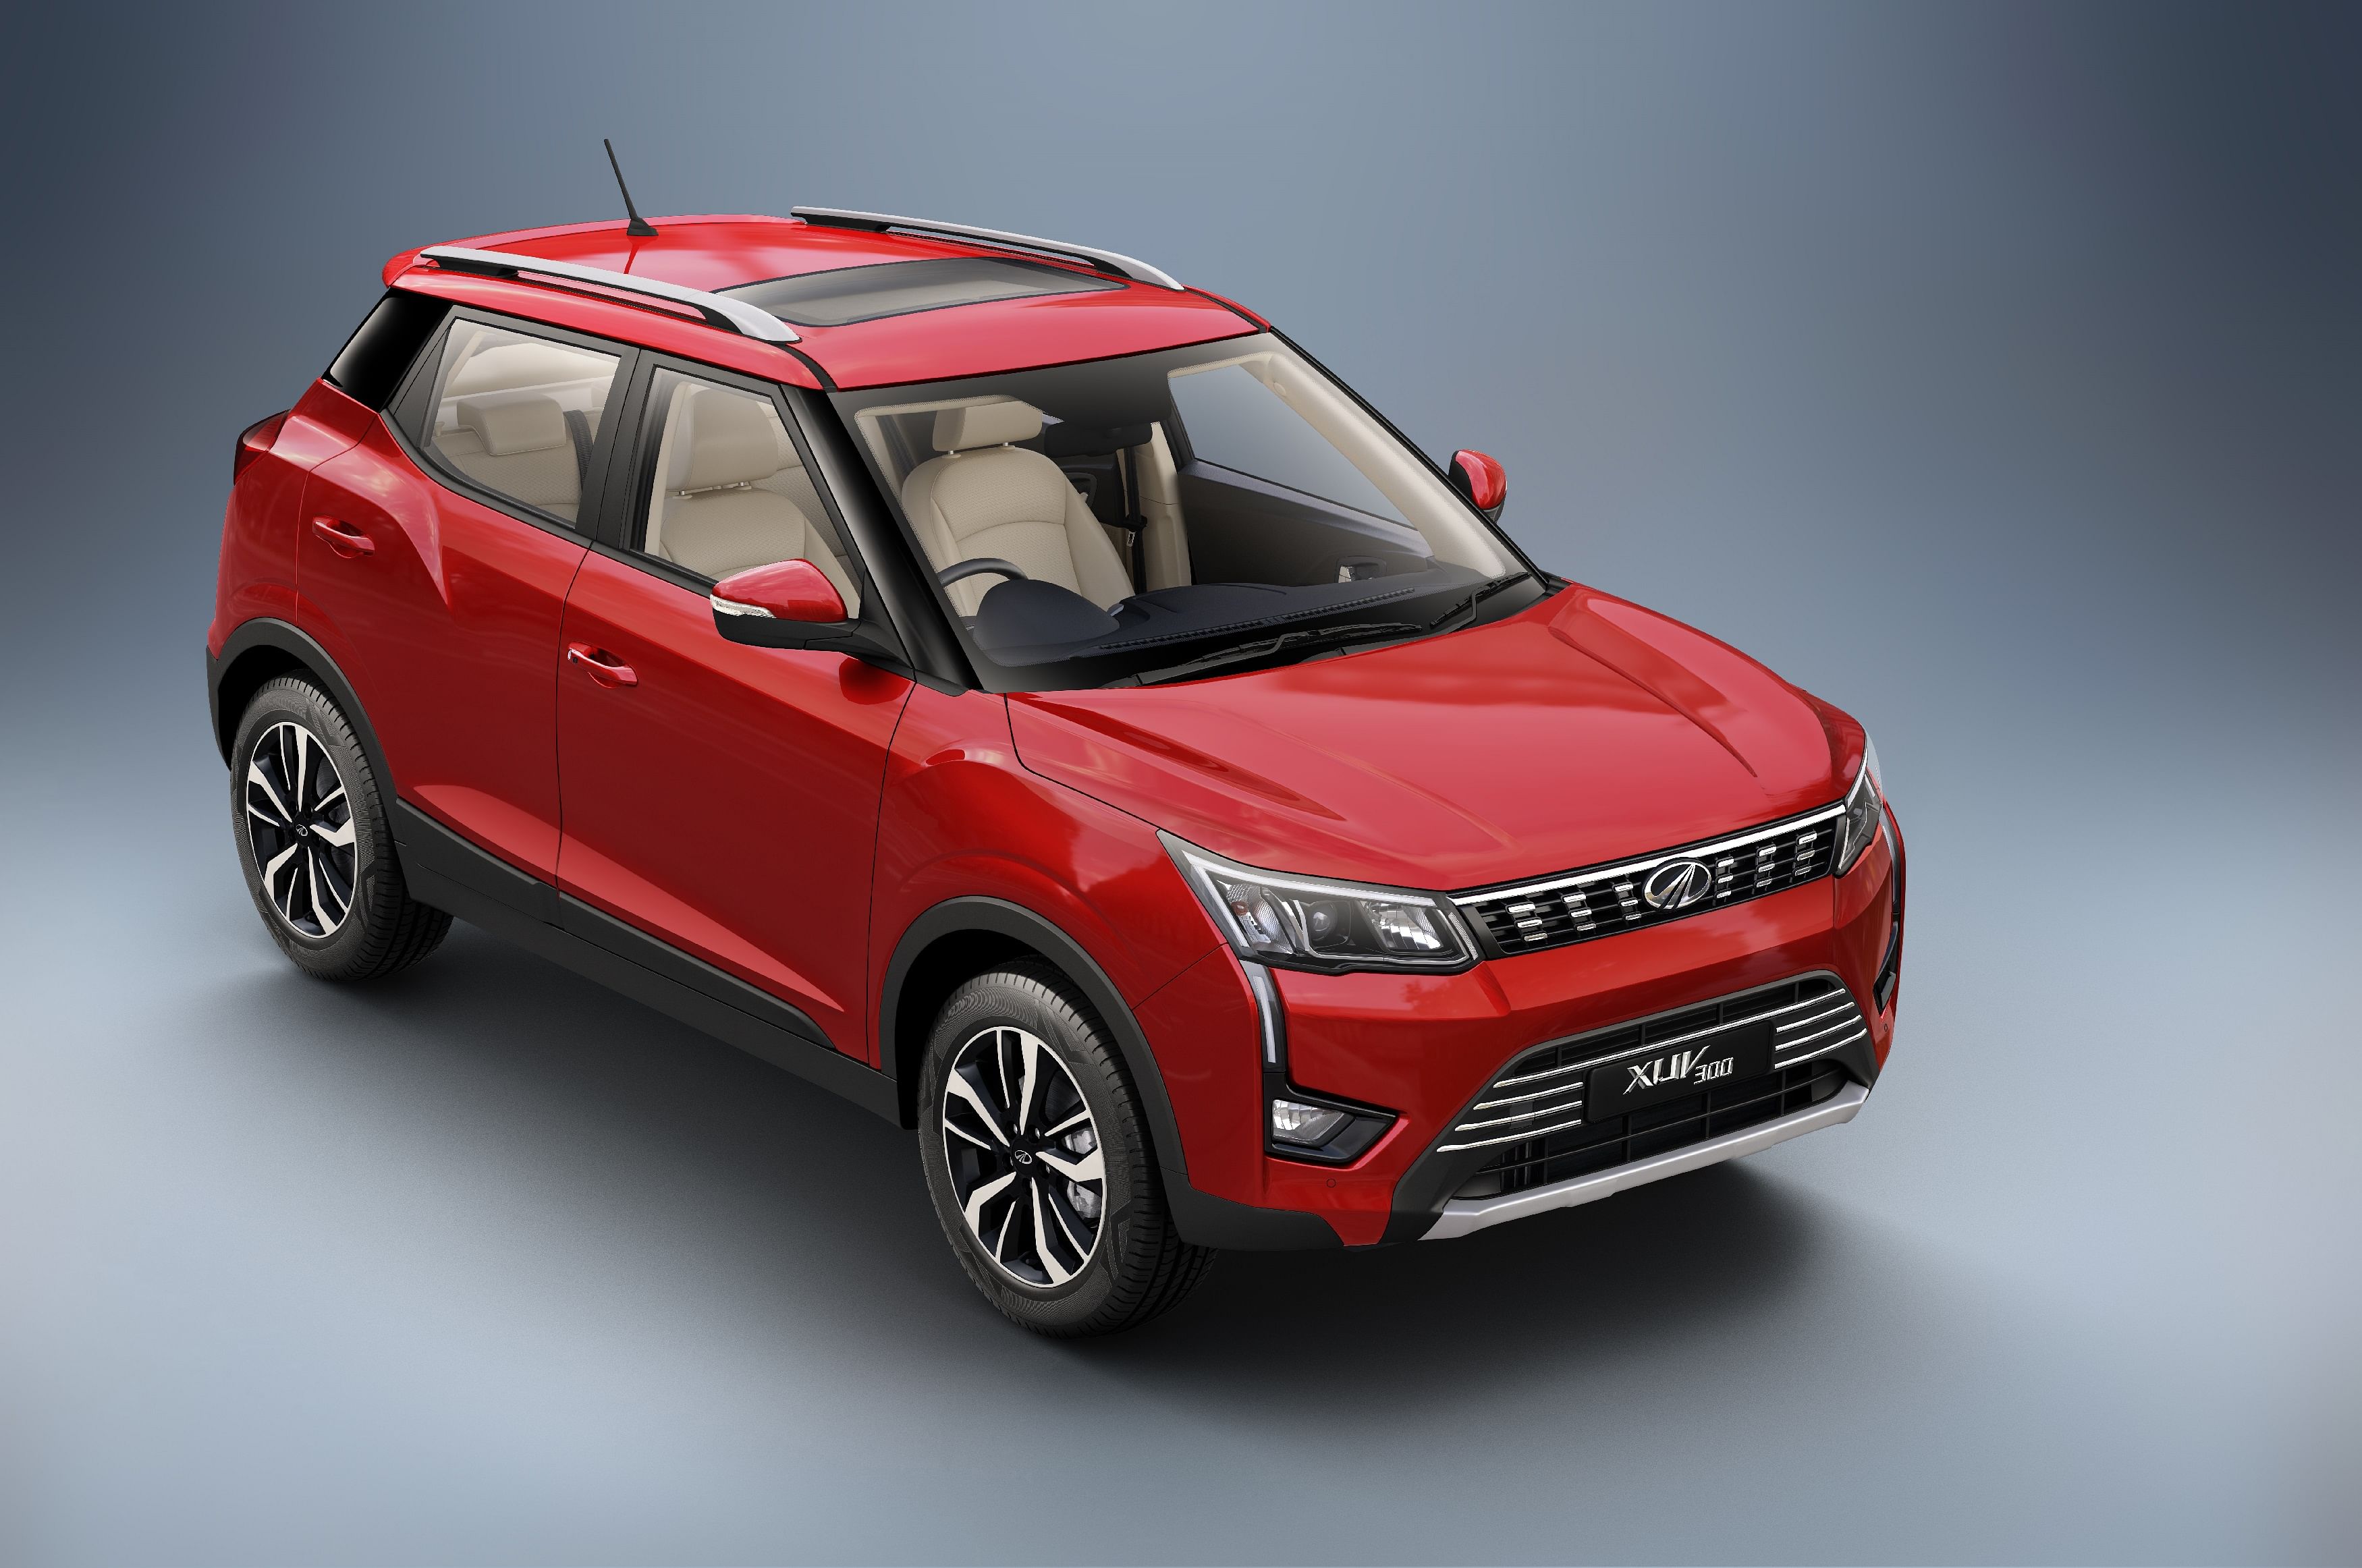 The BS-VI version of the XUV300 will be available on all its 1.2-litre turbo petrol offerings. 